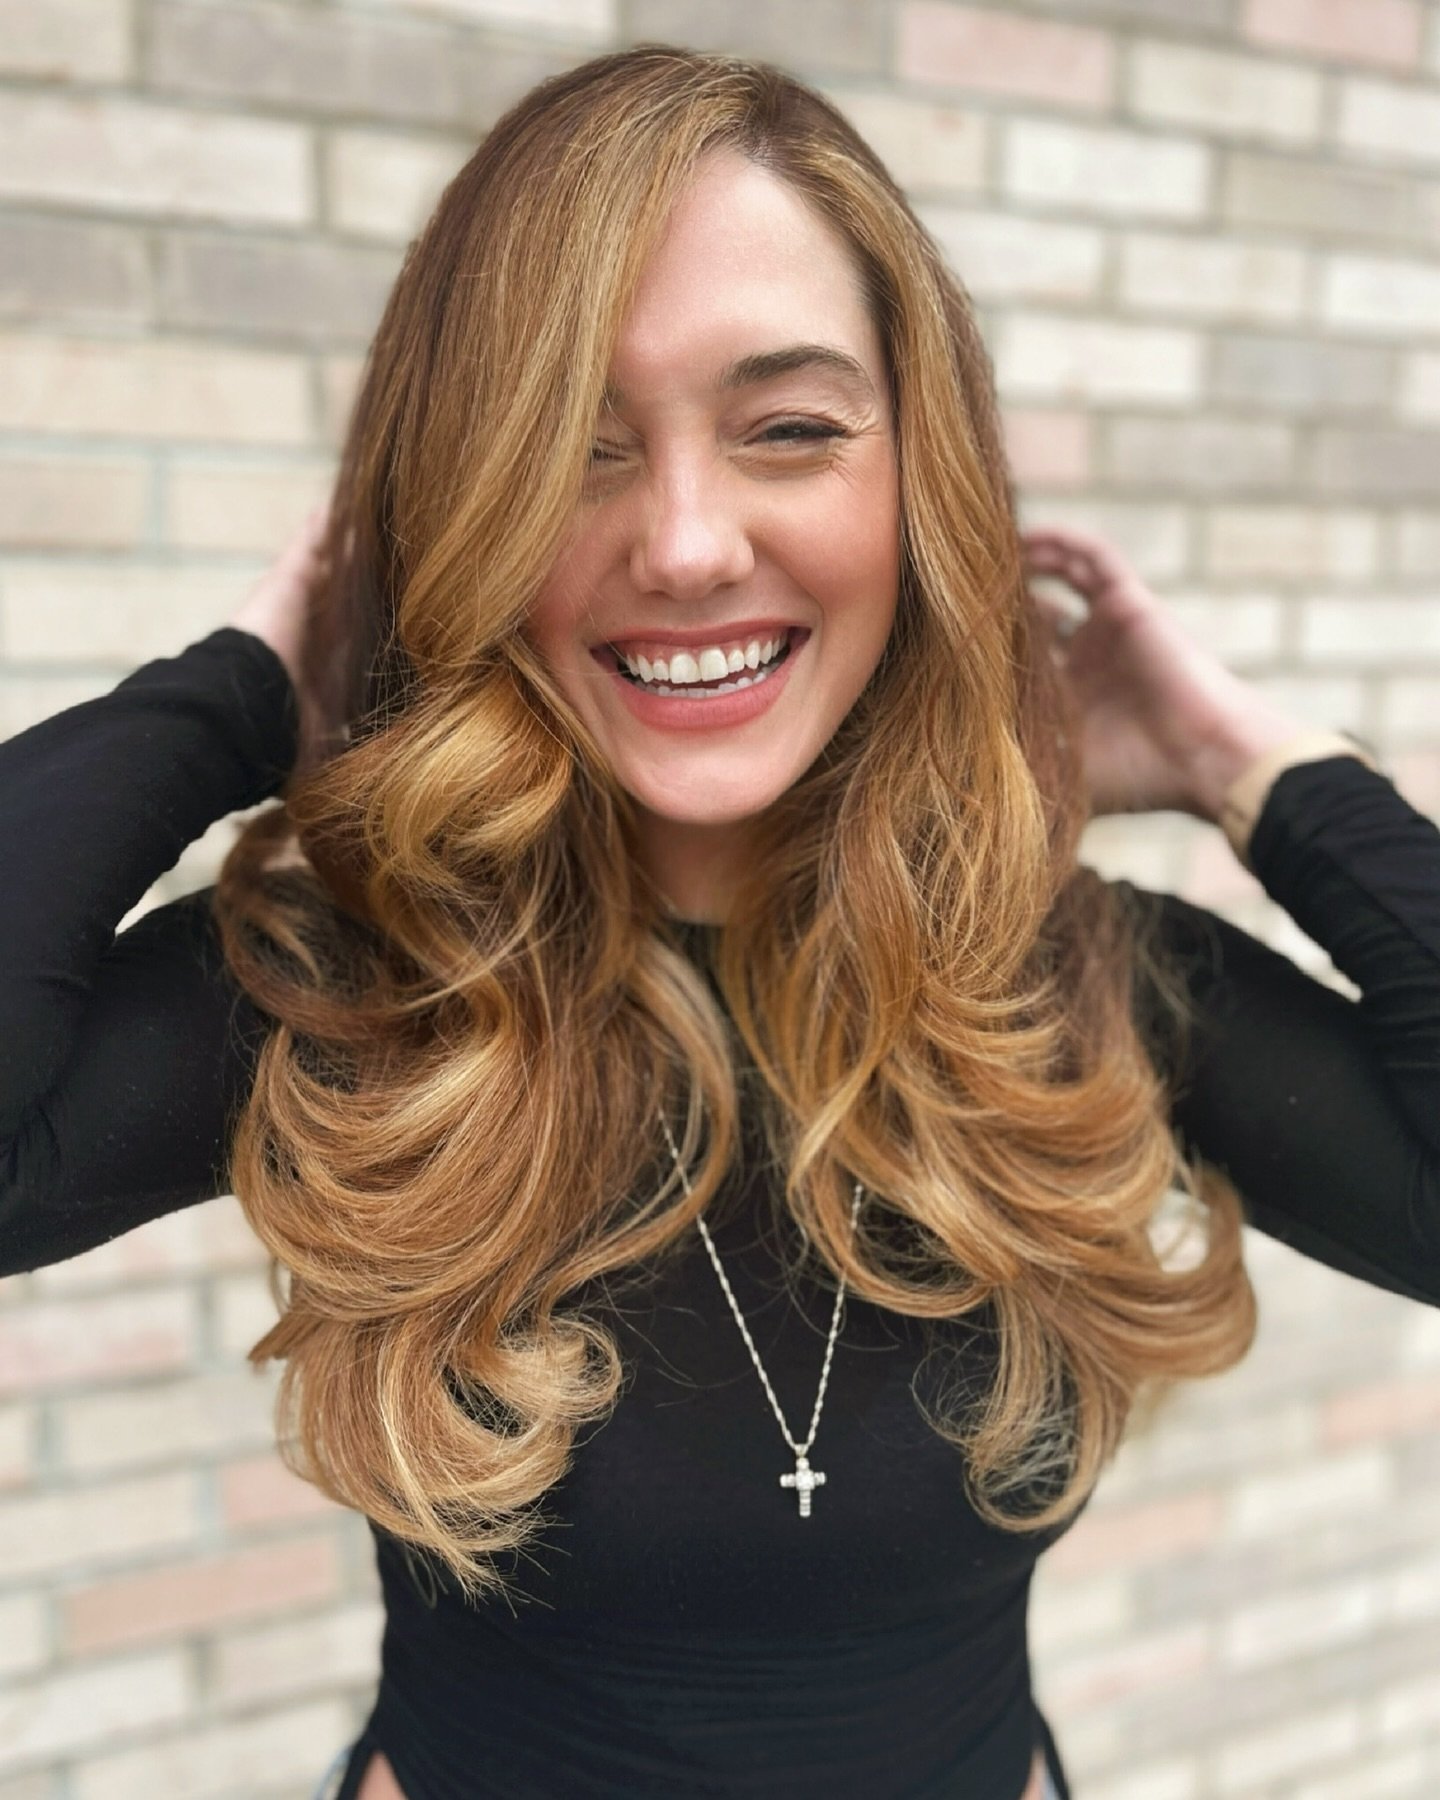 There&rsquo;s nothing better than fresh hair! Here&rsquo;s your sign to book your summer color now. April is all booked up, but I still have availability in May, so snag a spot now and let&rsquo;s make this the summer of your best hair ever!

#hairin